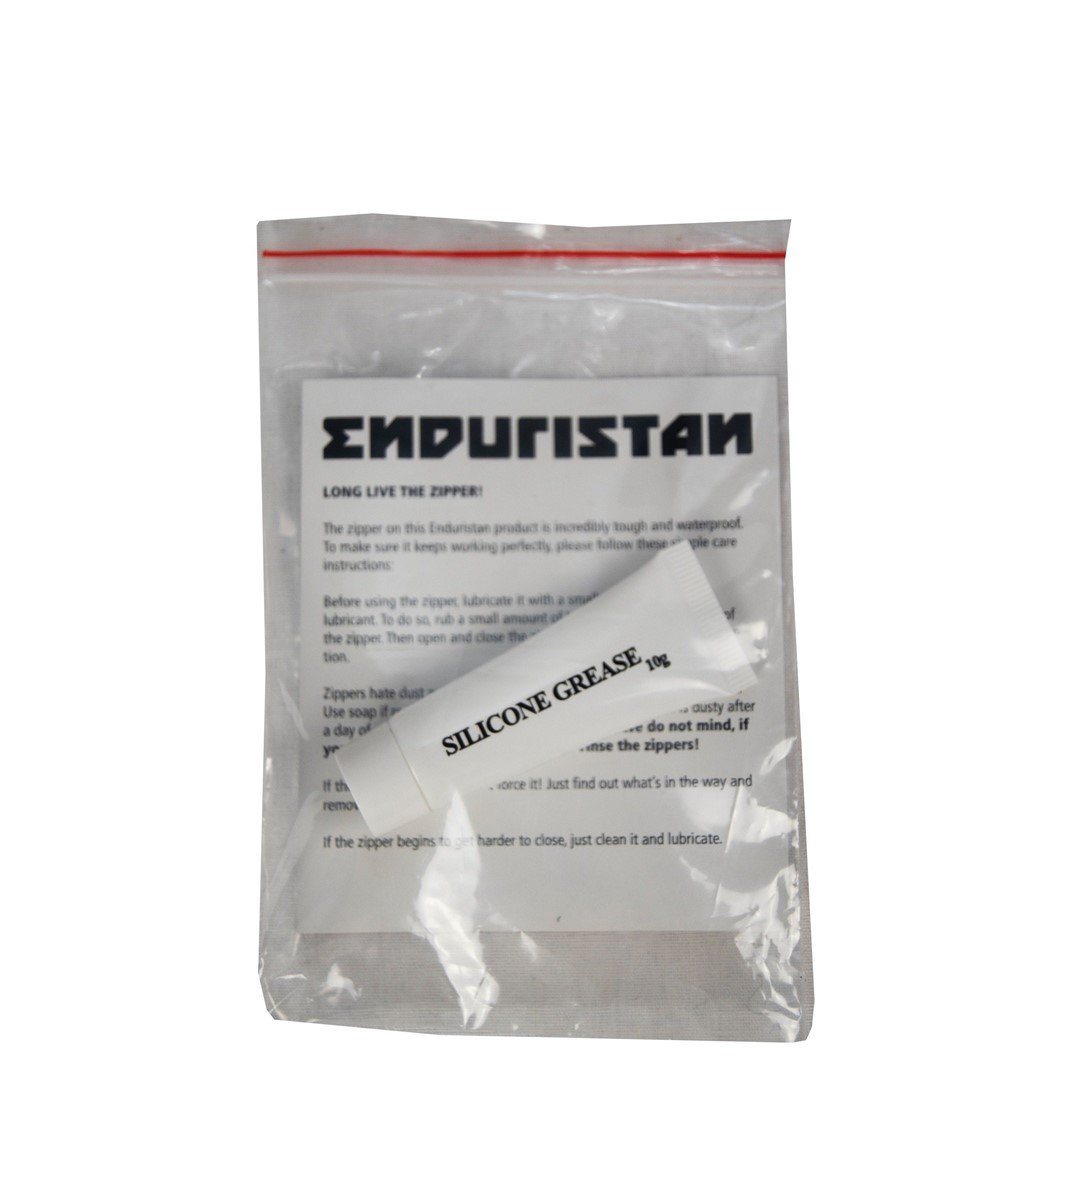 Enduristan USA, Zipper Lube Zipper Lube LURE-003, accessories, adventure back pack, adventure backpack, adventure bike luggage, adventure luggage, bmw gs tank bag, bmw gs tankbag, dirt bike luggage, dirtbike luggage, enduristan, enduristan uk, enduro luggage, luggage, motorbike bags, motorbike luggage, off road luggage, overland travel, soft motorcycle luggage, soft motorcycle panniers, soft saddle bags enduro, wateproof tank bags, waterproof enduro bags, waterproof motorcycle luggage, waterproof motorcycle